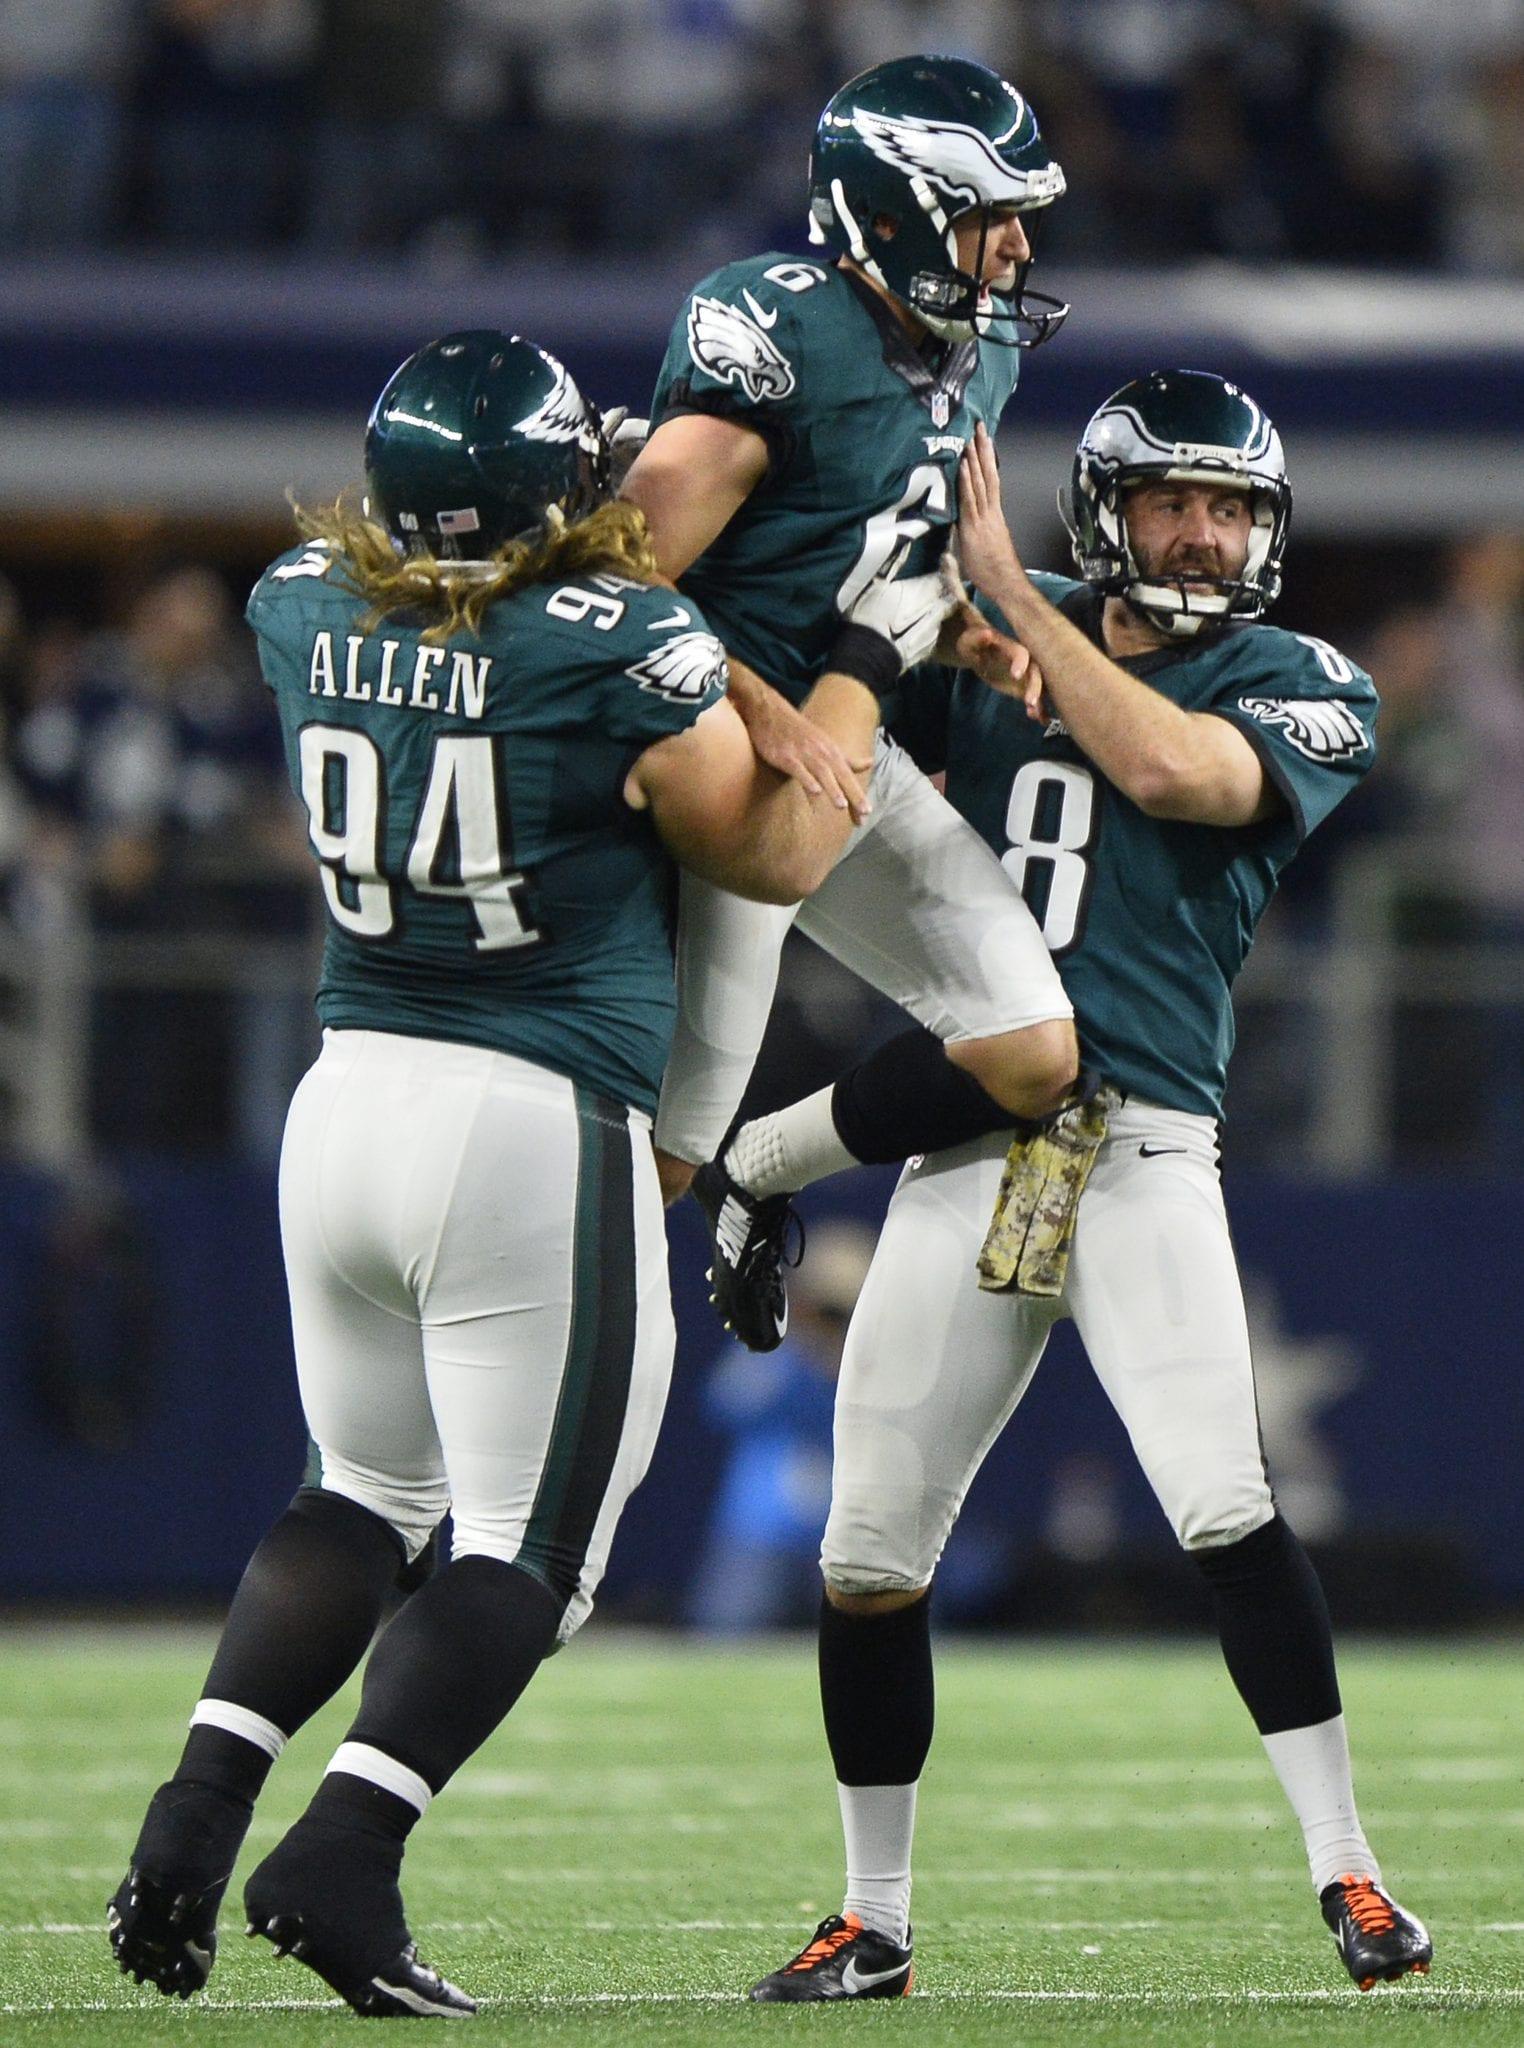 Philadelphia Eagles’ punter sees God’s hand in path to Super Bowl